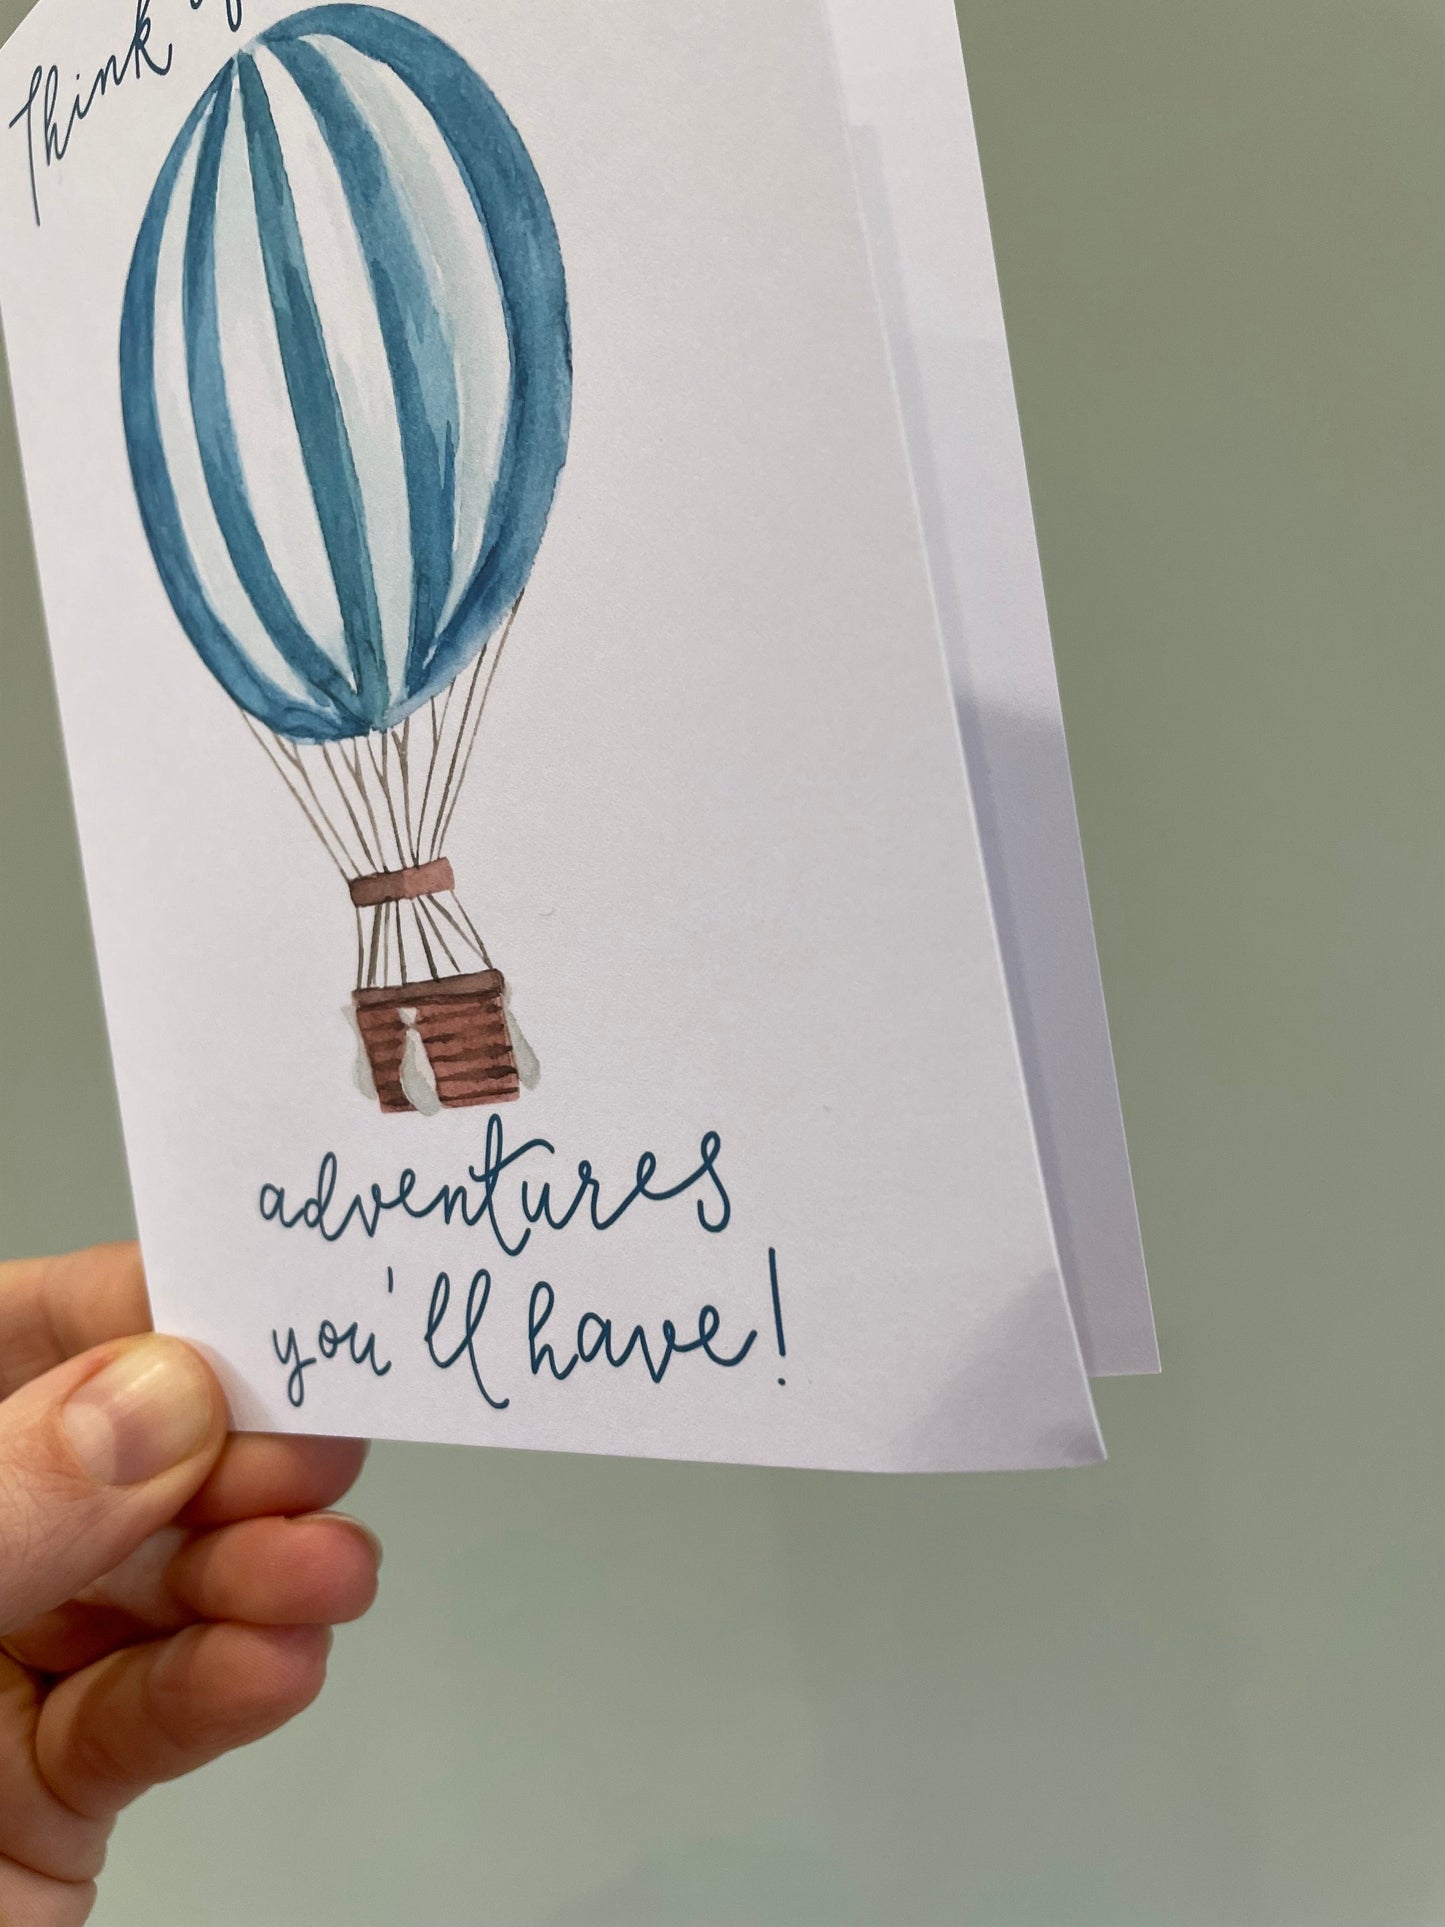 SECONDS - Think of all the adventures -hot air balloon  And Hope Designs   